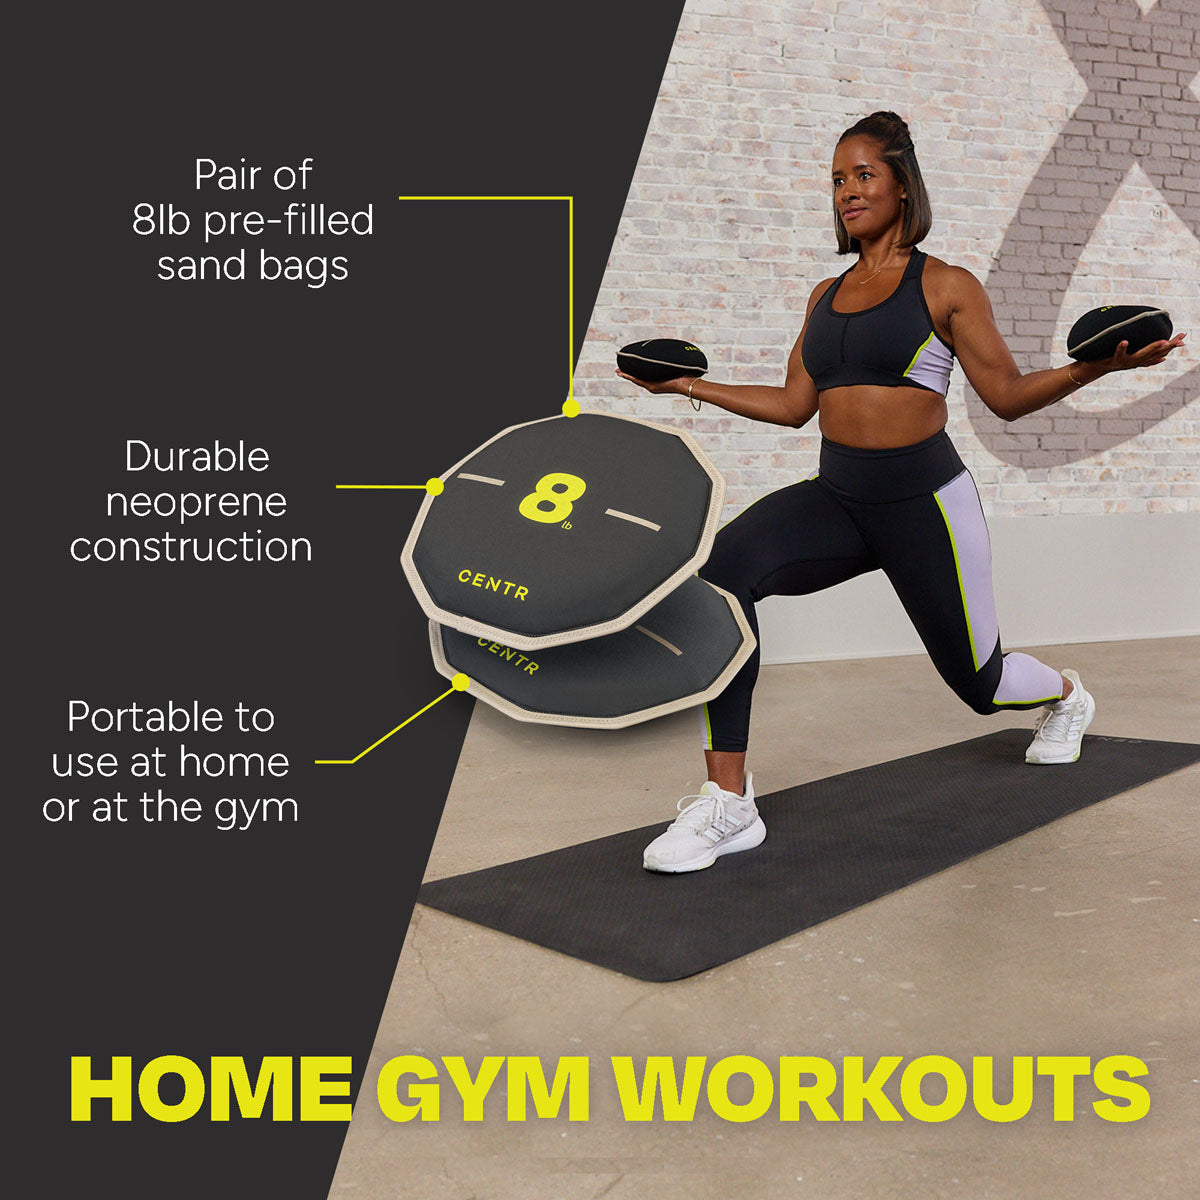 Sand-Pad exercises for advanced users - Gymbox innovative Sand-Pads